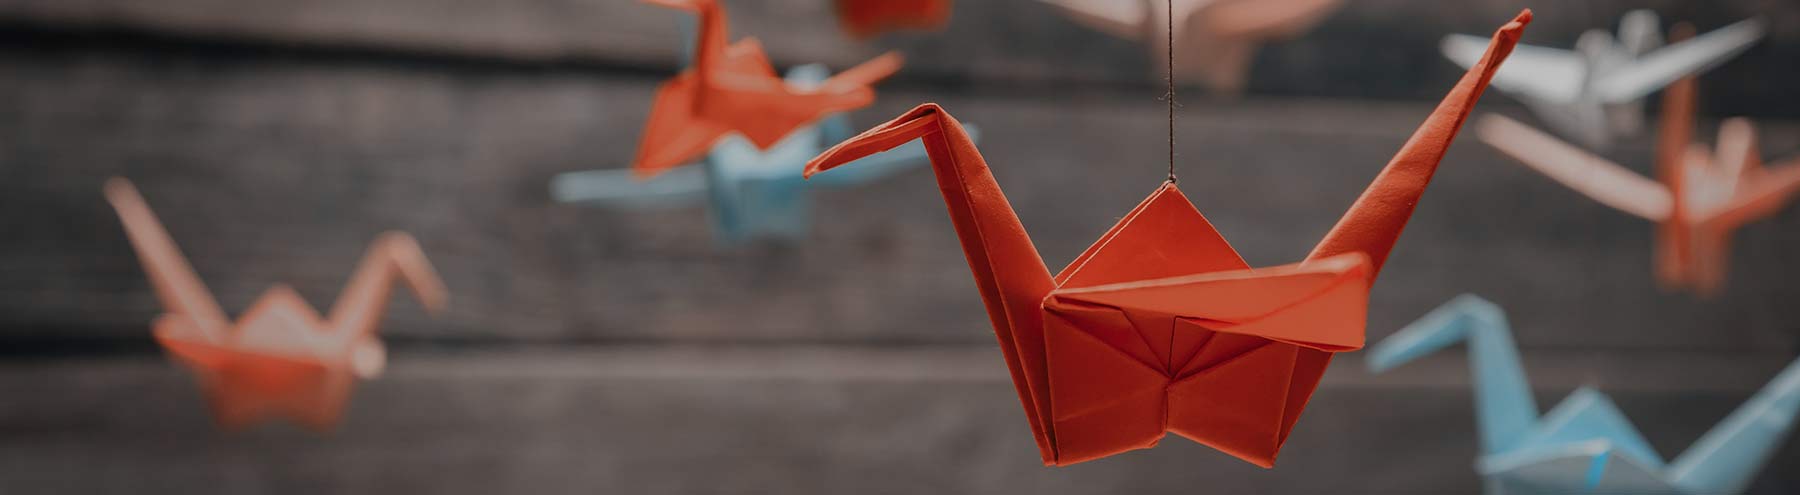 What’s the connection between a cow, a digital printer and origami?